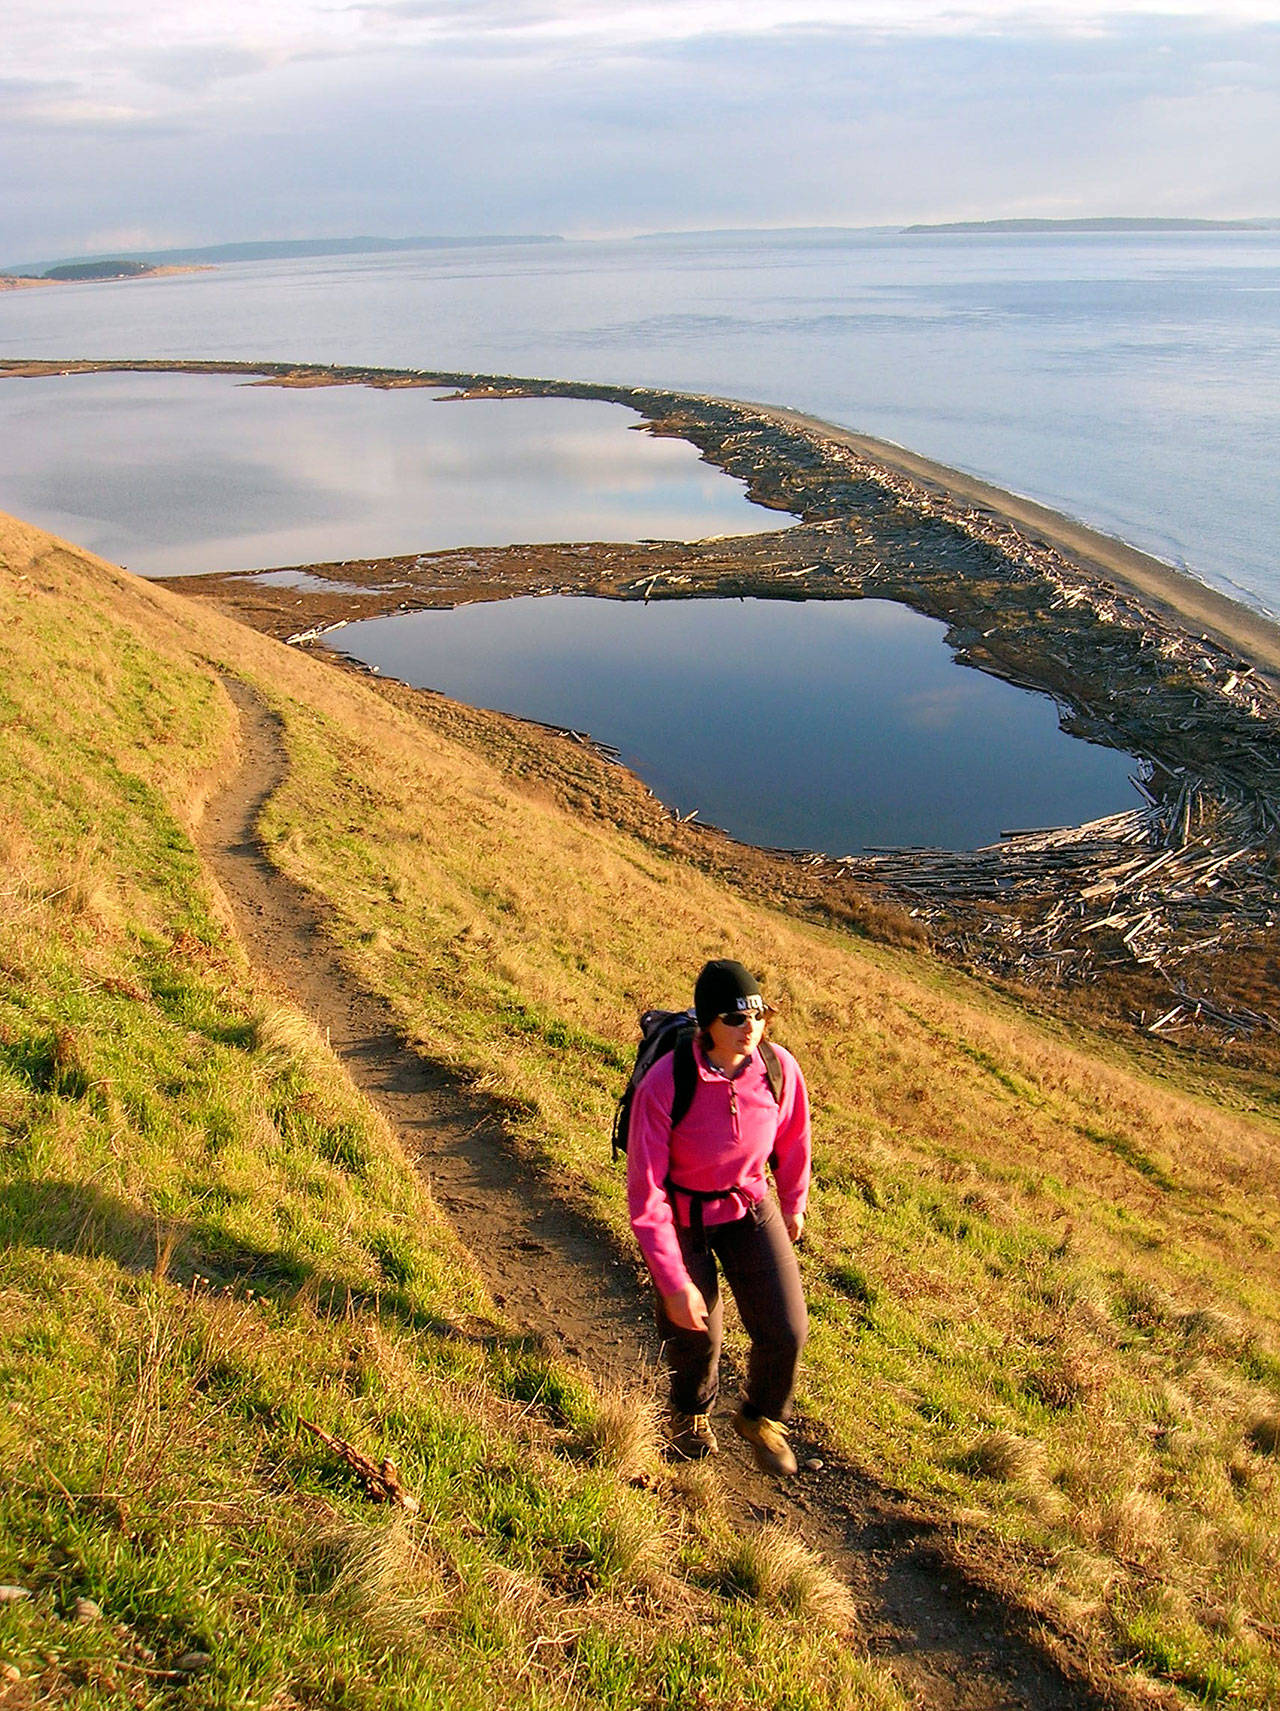 Photo by Craig Romano                                 Heather Romano hikes the Bluff Trail at Ebey’s Landing Historical Reserve on Whidbey Island.